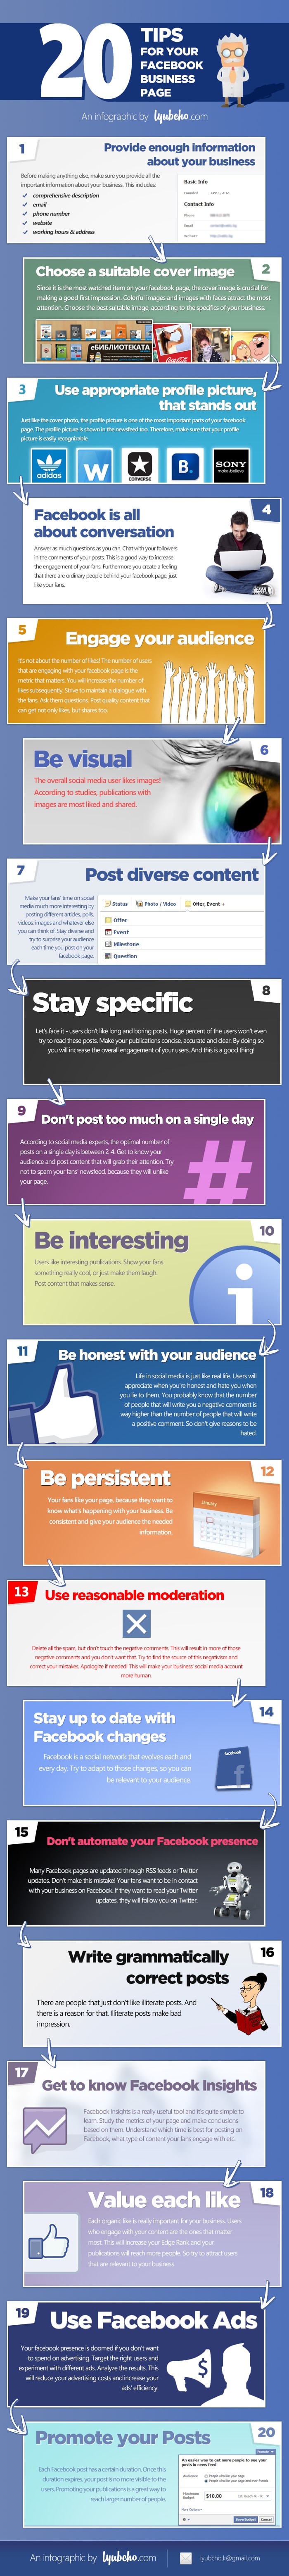 tips-facebook-business-page-infographic